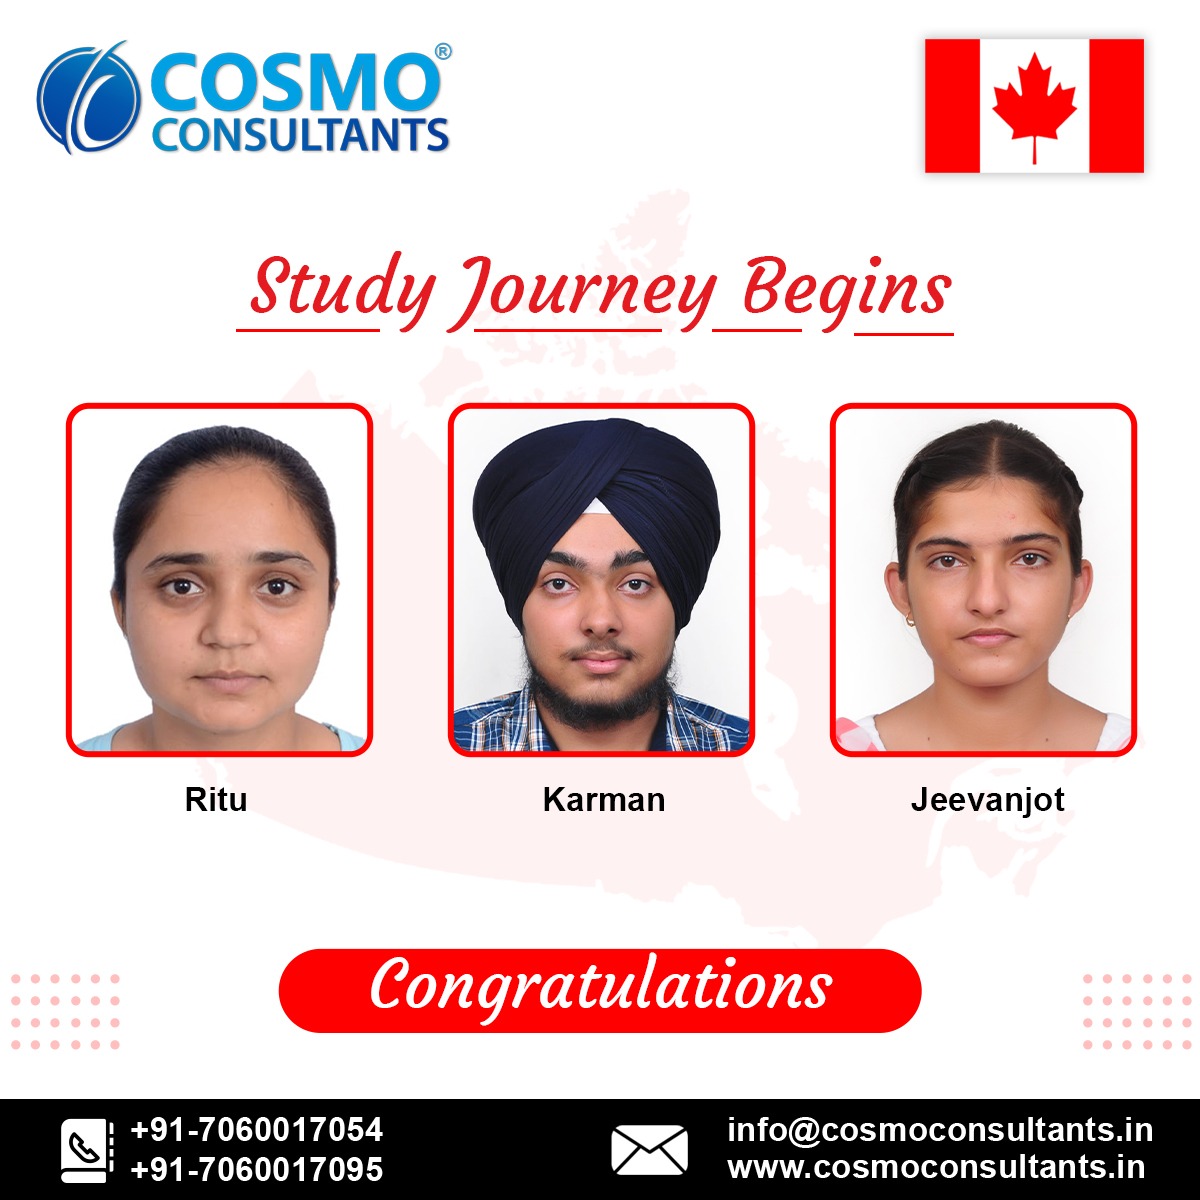 Team Cosmo Congratulates all these students and wishes them a Bright and Successful future.
For more information reach us: +91-7060017054, +91-7060017095.

#CosmoConsultants #Canada #StudyInCanada #StudyAbroad #studentvisa #studyvisa #canadavisa #education #canadaimmigration